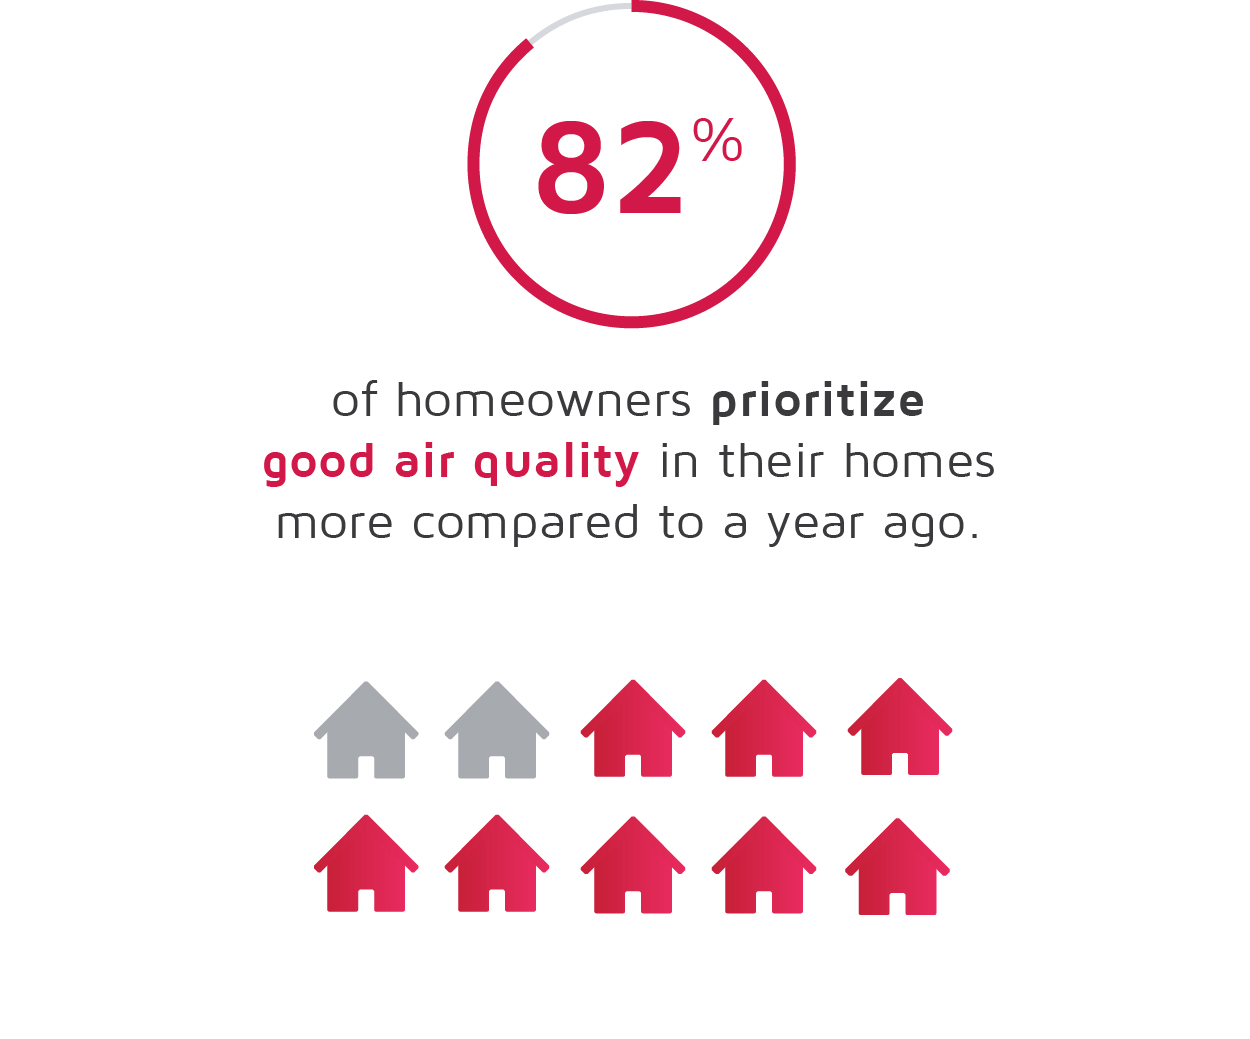 82% of homeowners prioritize good air quality in their homes more compared to a year ago.